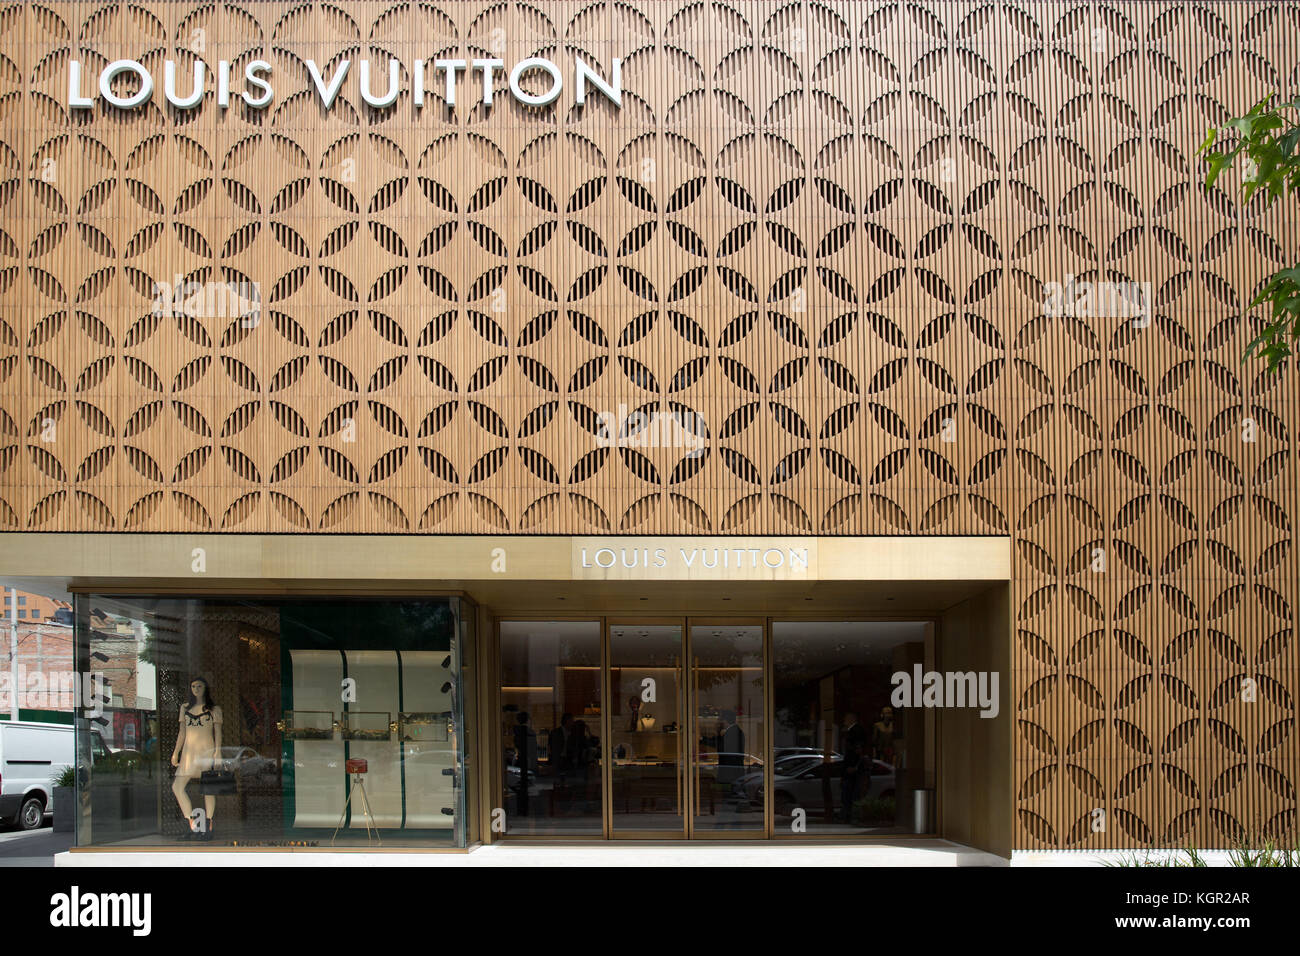 Assimilate Enrich Effektivt The Louis Vuitton Store in President Masaryk street in Mexico City, Mexico  on October 12, 2017 Stock Photo - Alamy